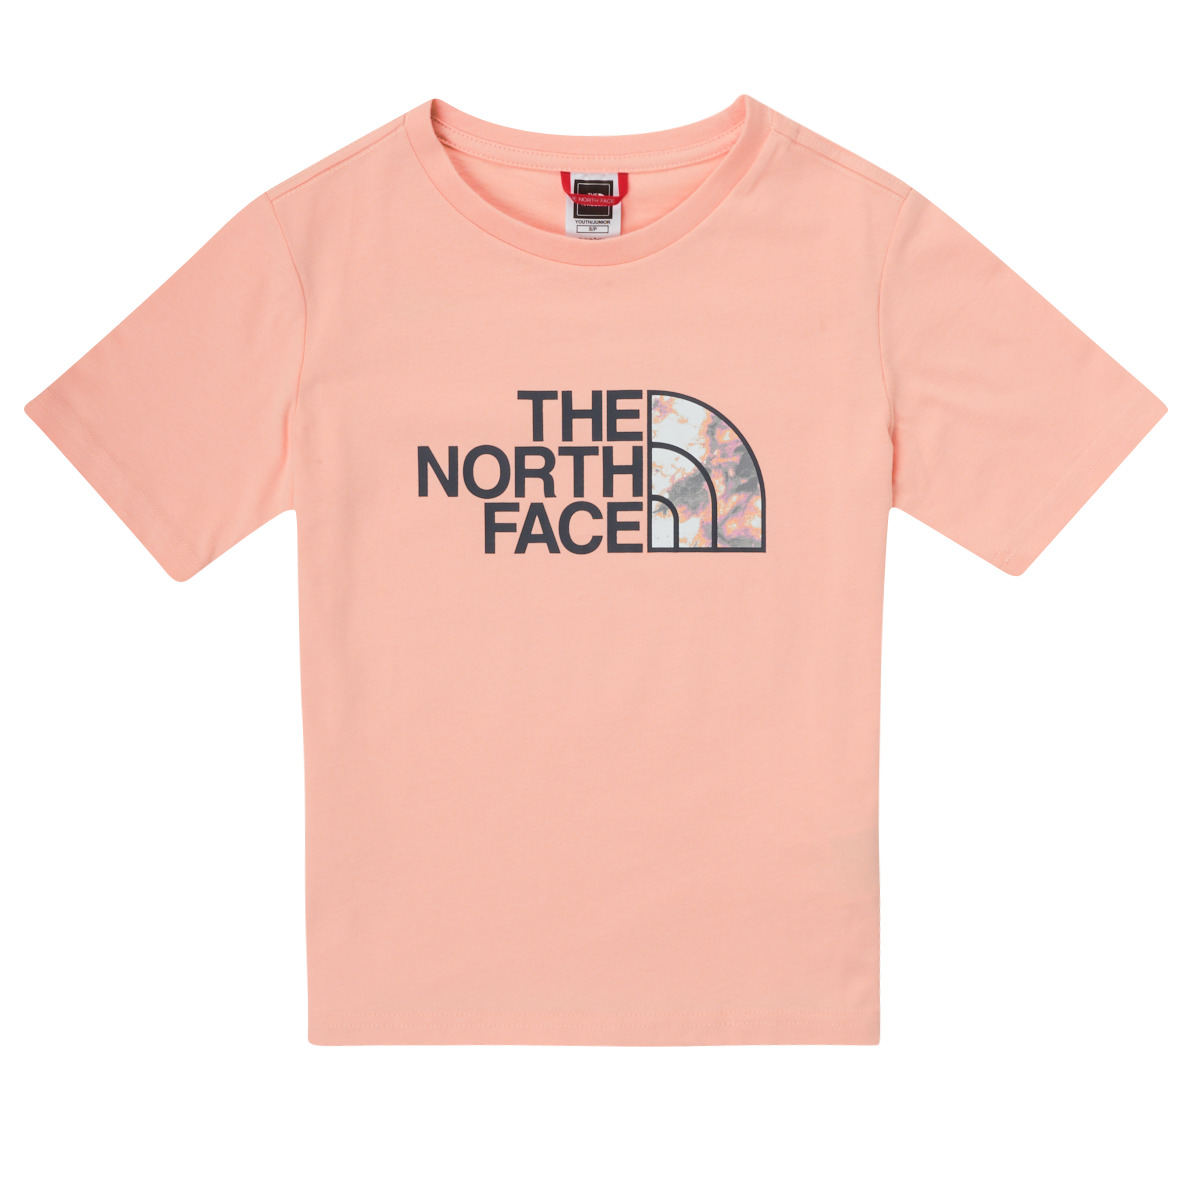 The north face the north face easy boyfriend shirt roze kinderen